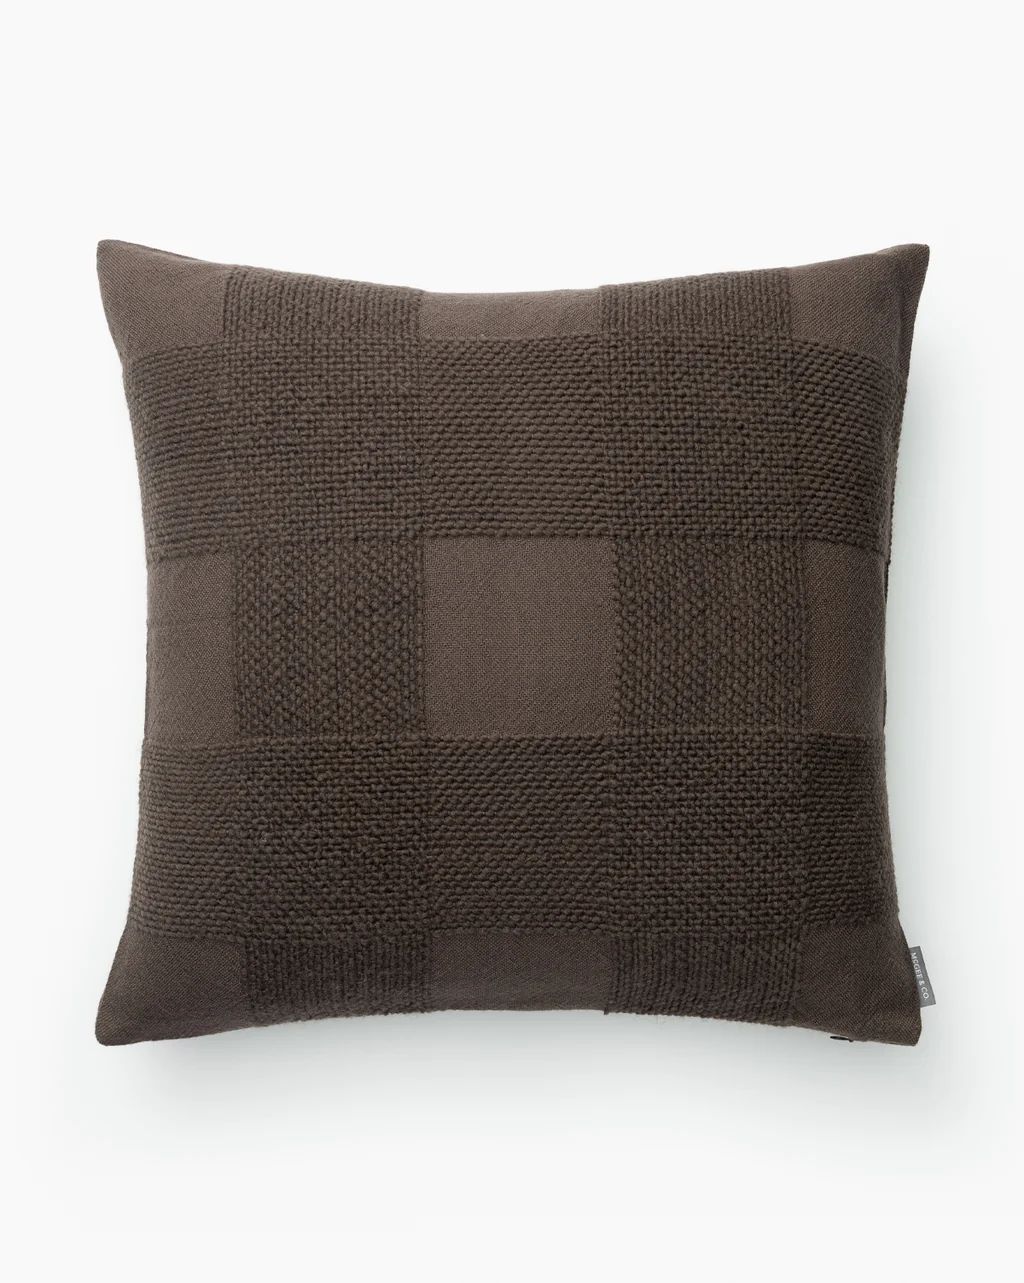 Stanley Pillow Cover | McGee & Co.